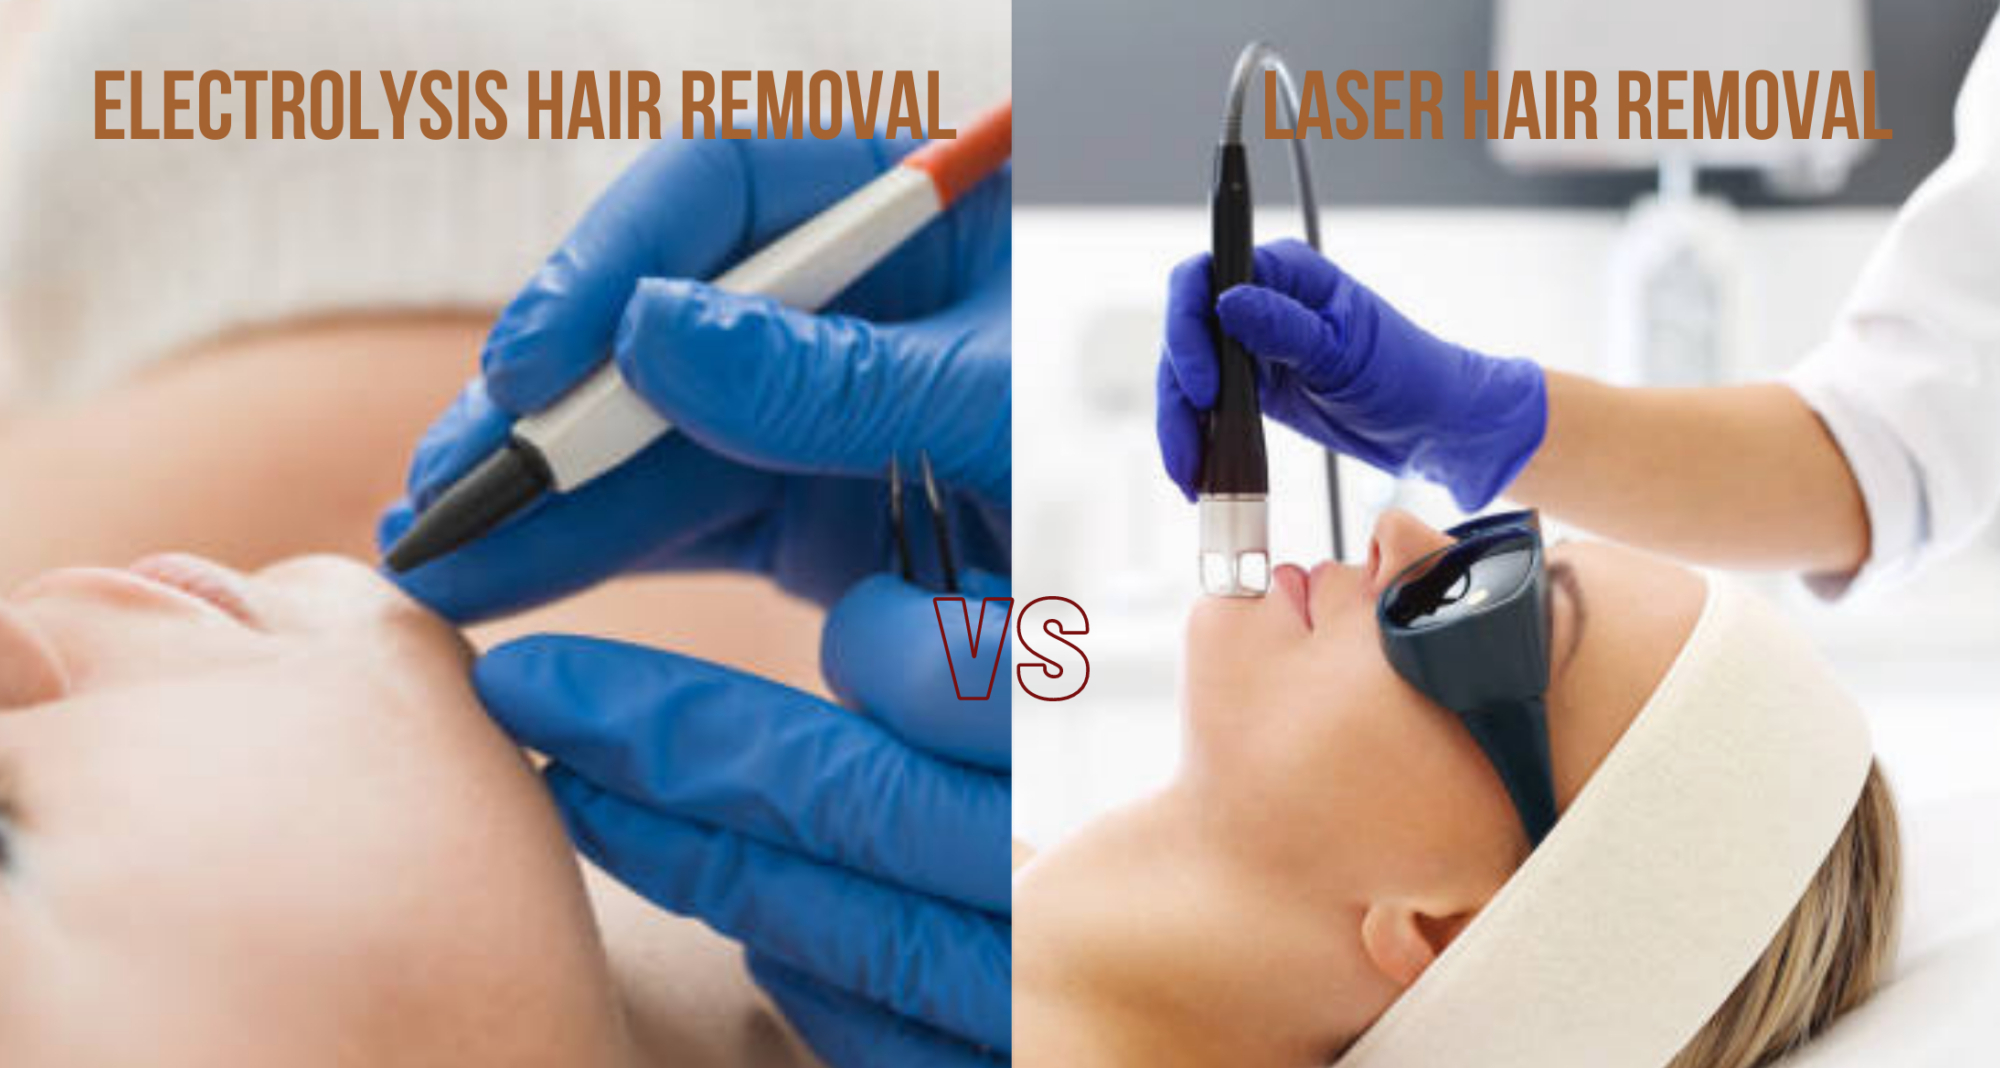 What Is The Difference Between Laser Hair Removal And Electrolysis